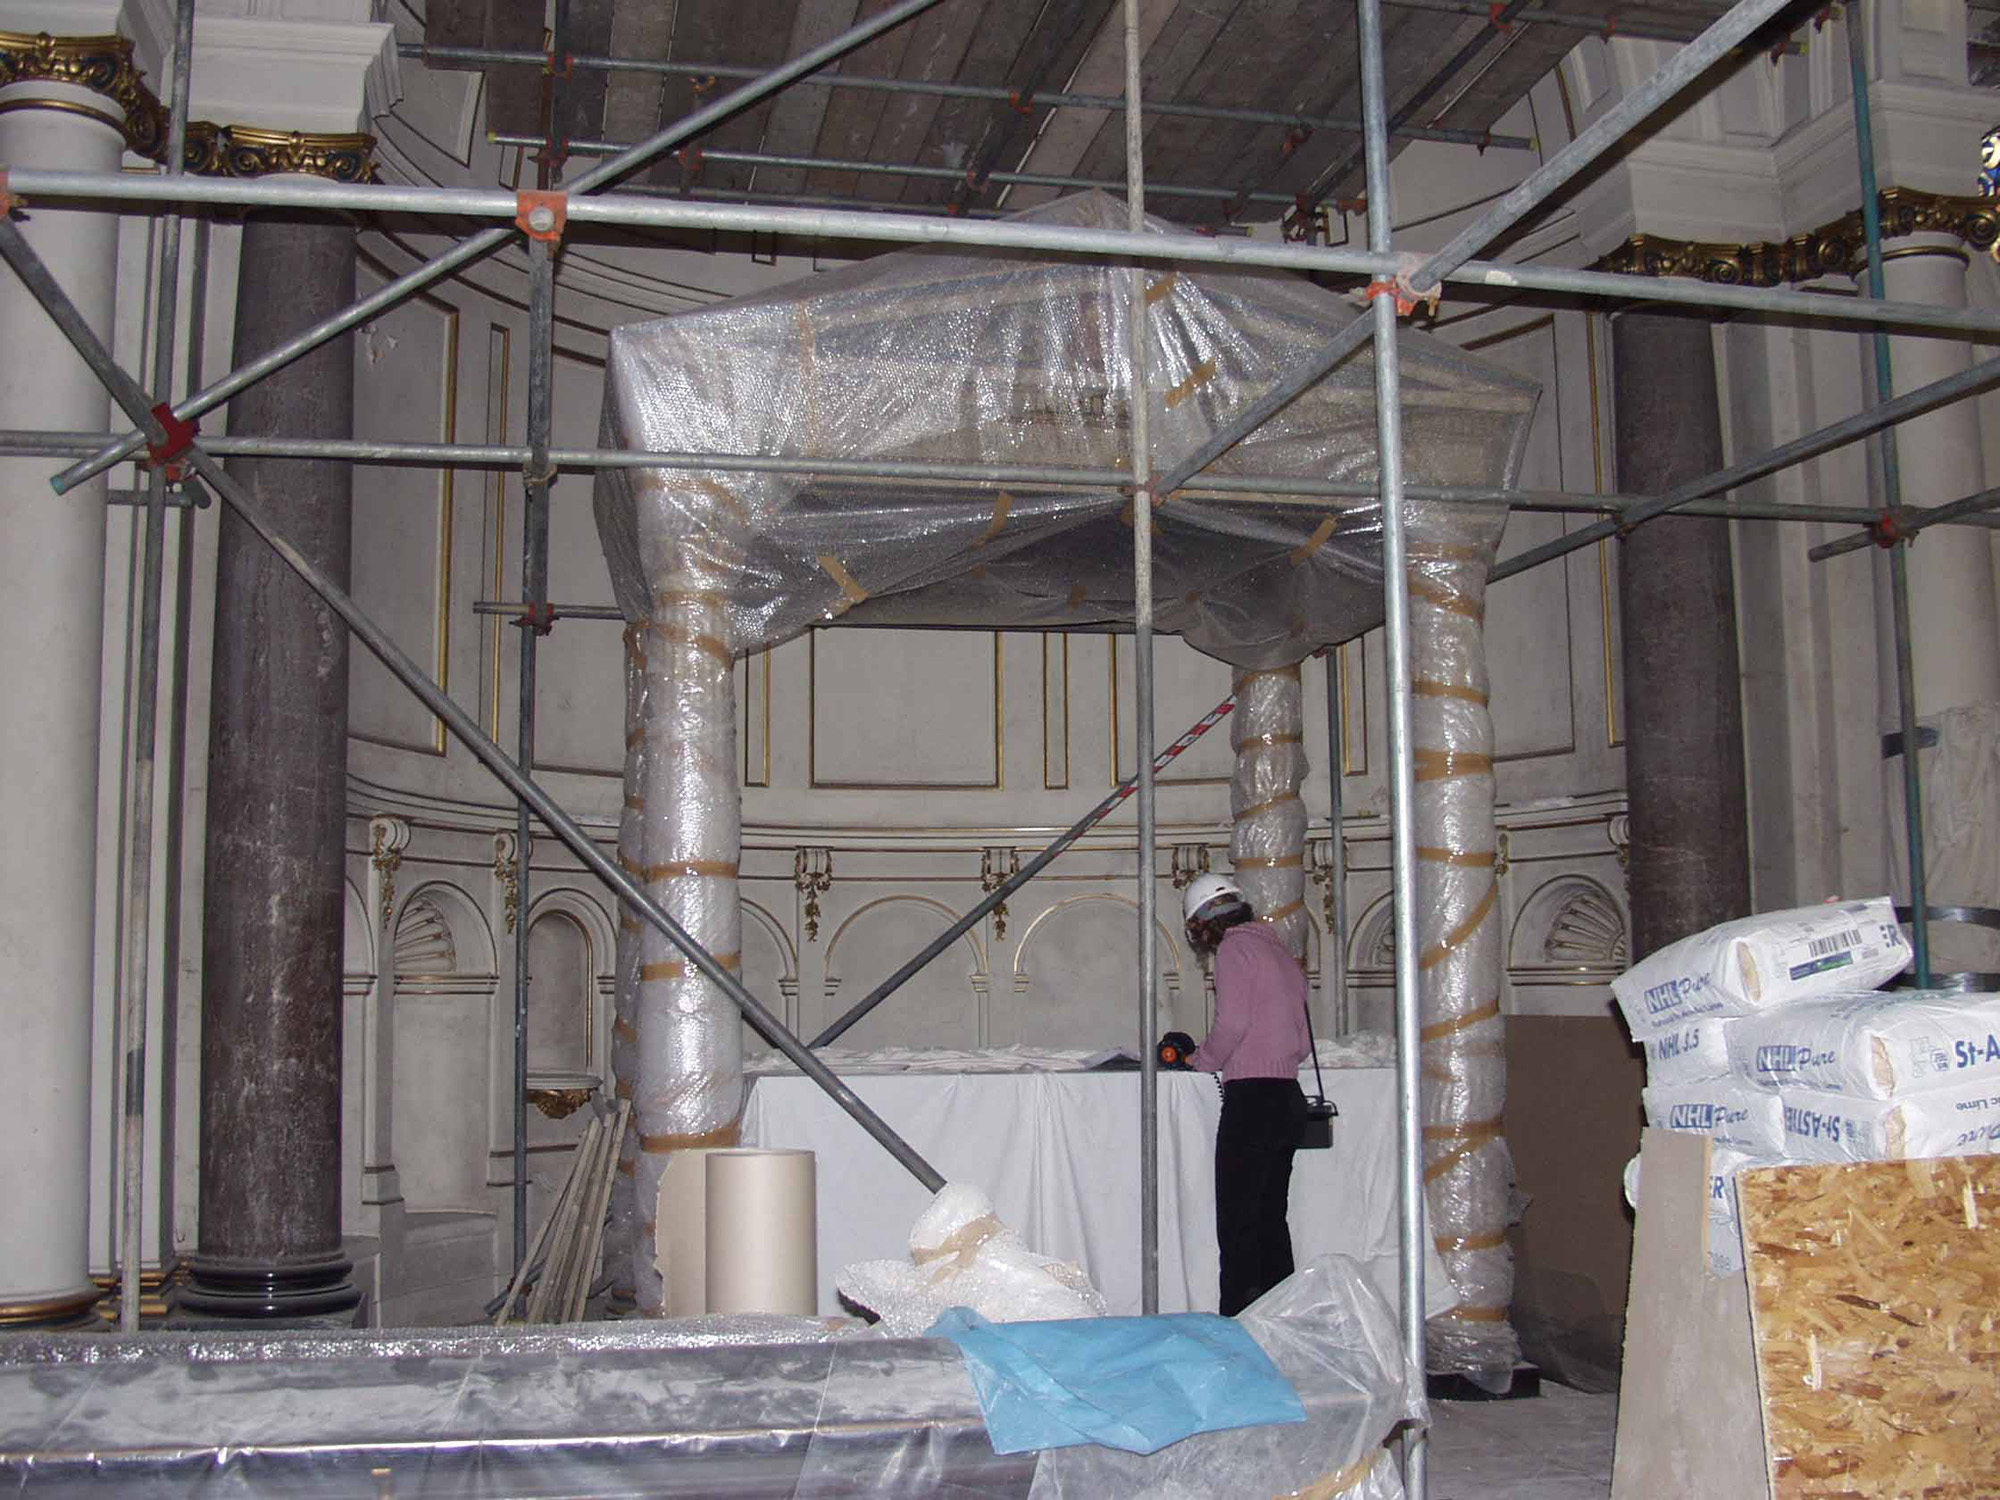 A person in a hard hat stands in front of a baldaquin covered in bubble-wrap, flanked by two columns and surrounded by scaffolding.